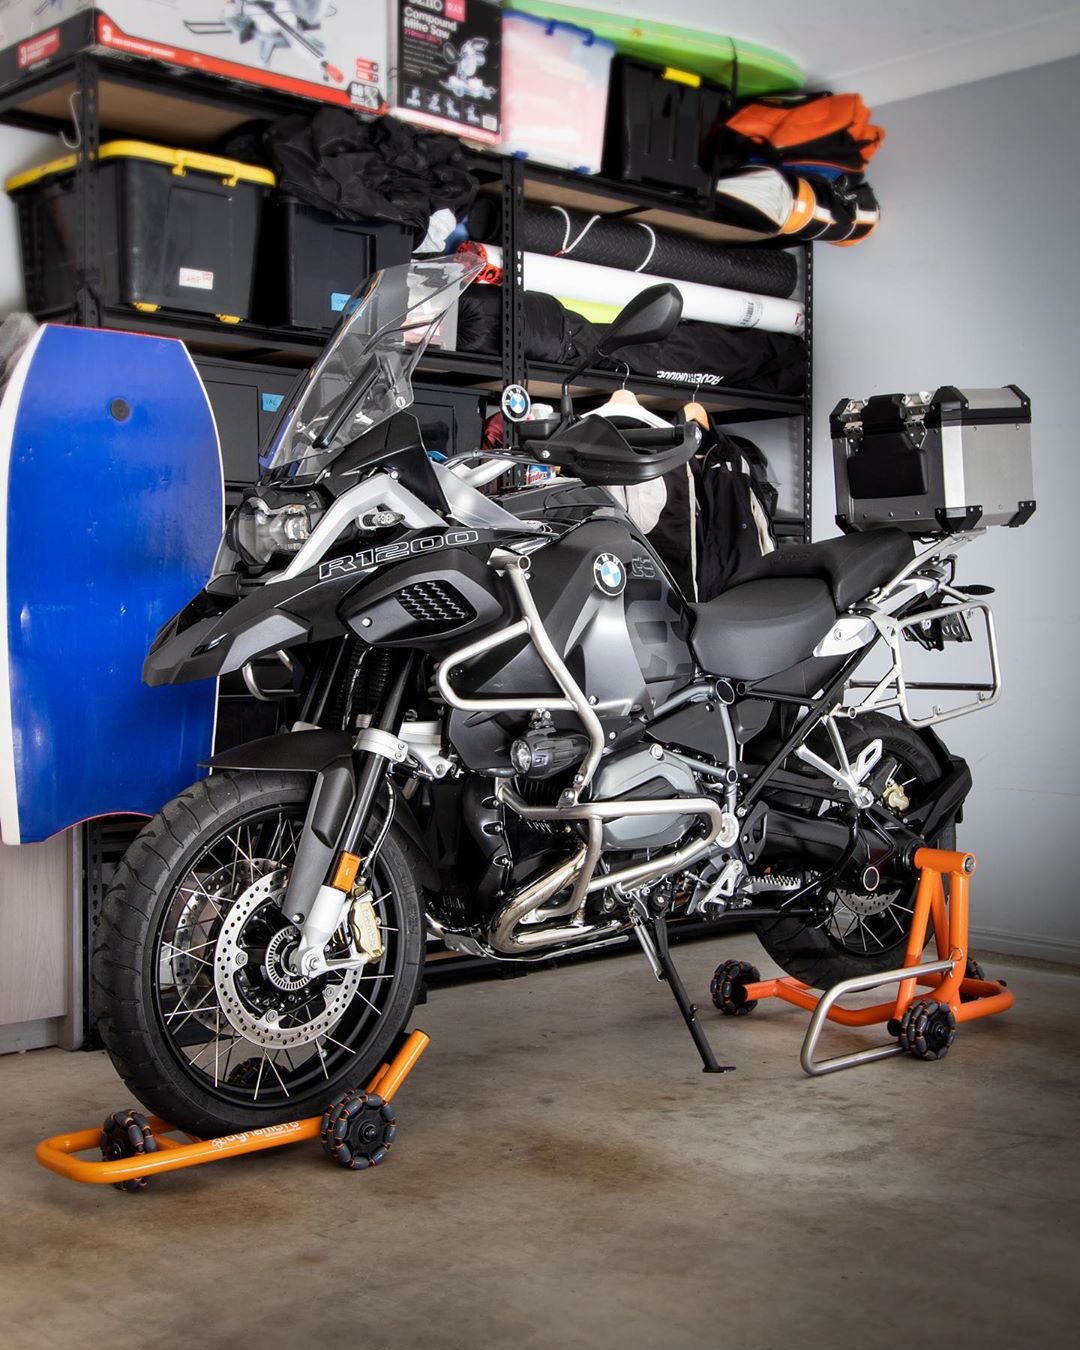 bmw motorcycle on a rolling lift in a home garage photo by Instagram user @dynamoto_official